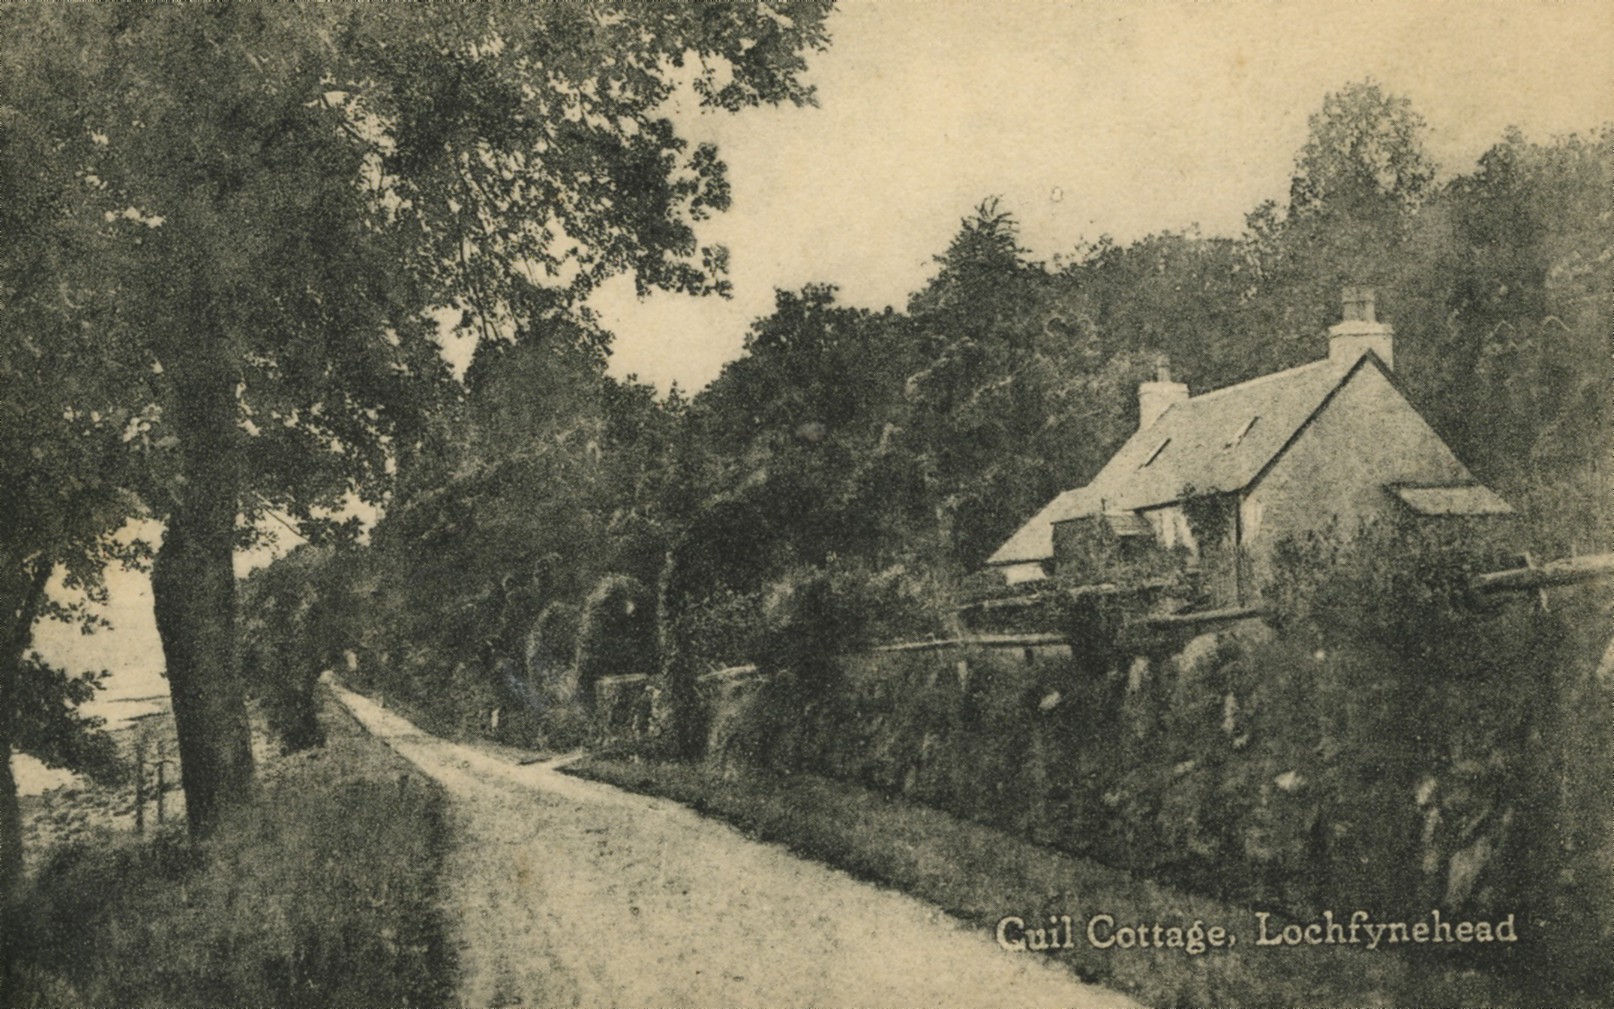 Cuil Cottage